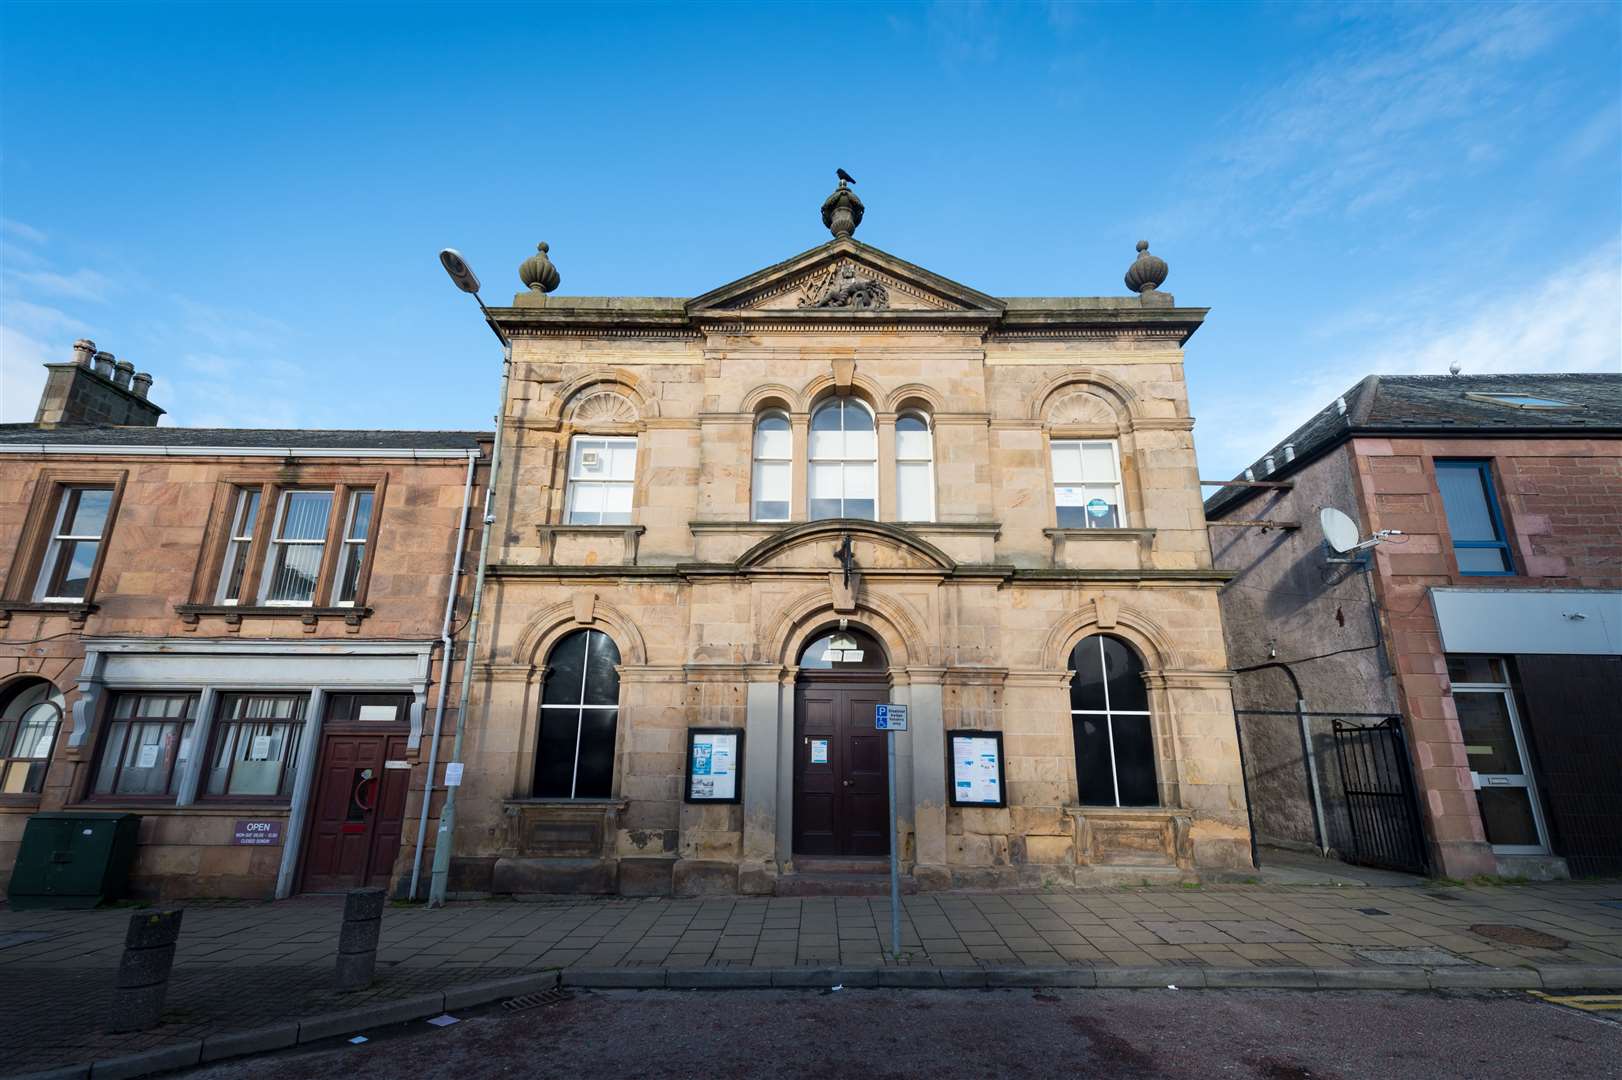 Invergordon Town Hall on the High Street holds fond memories for many but has an uncertain future.